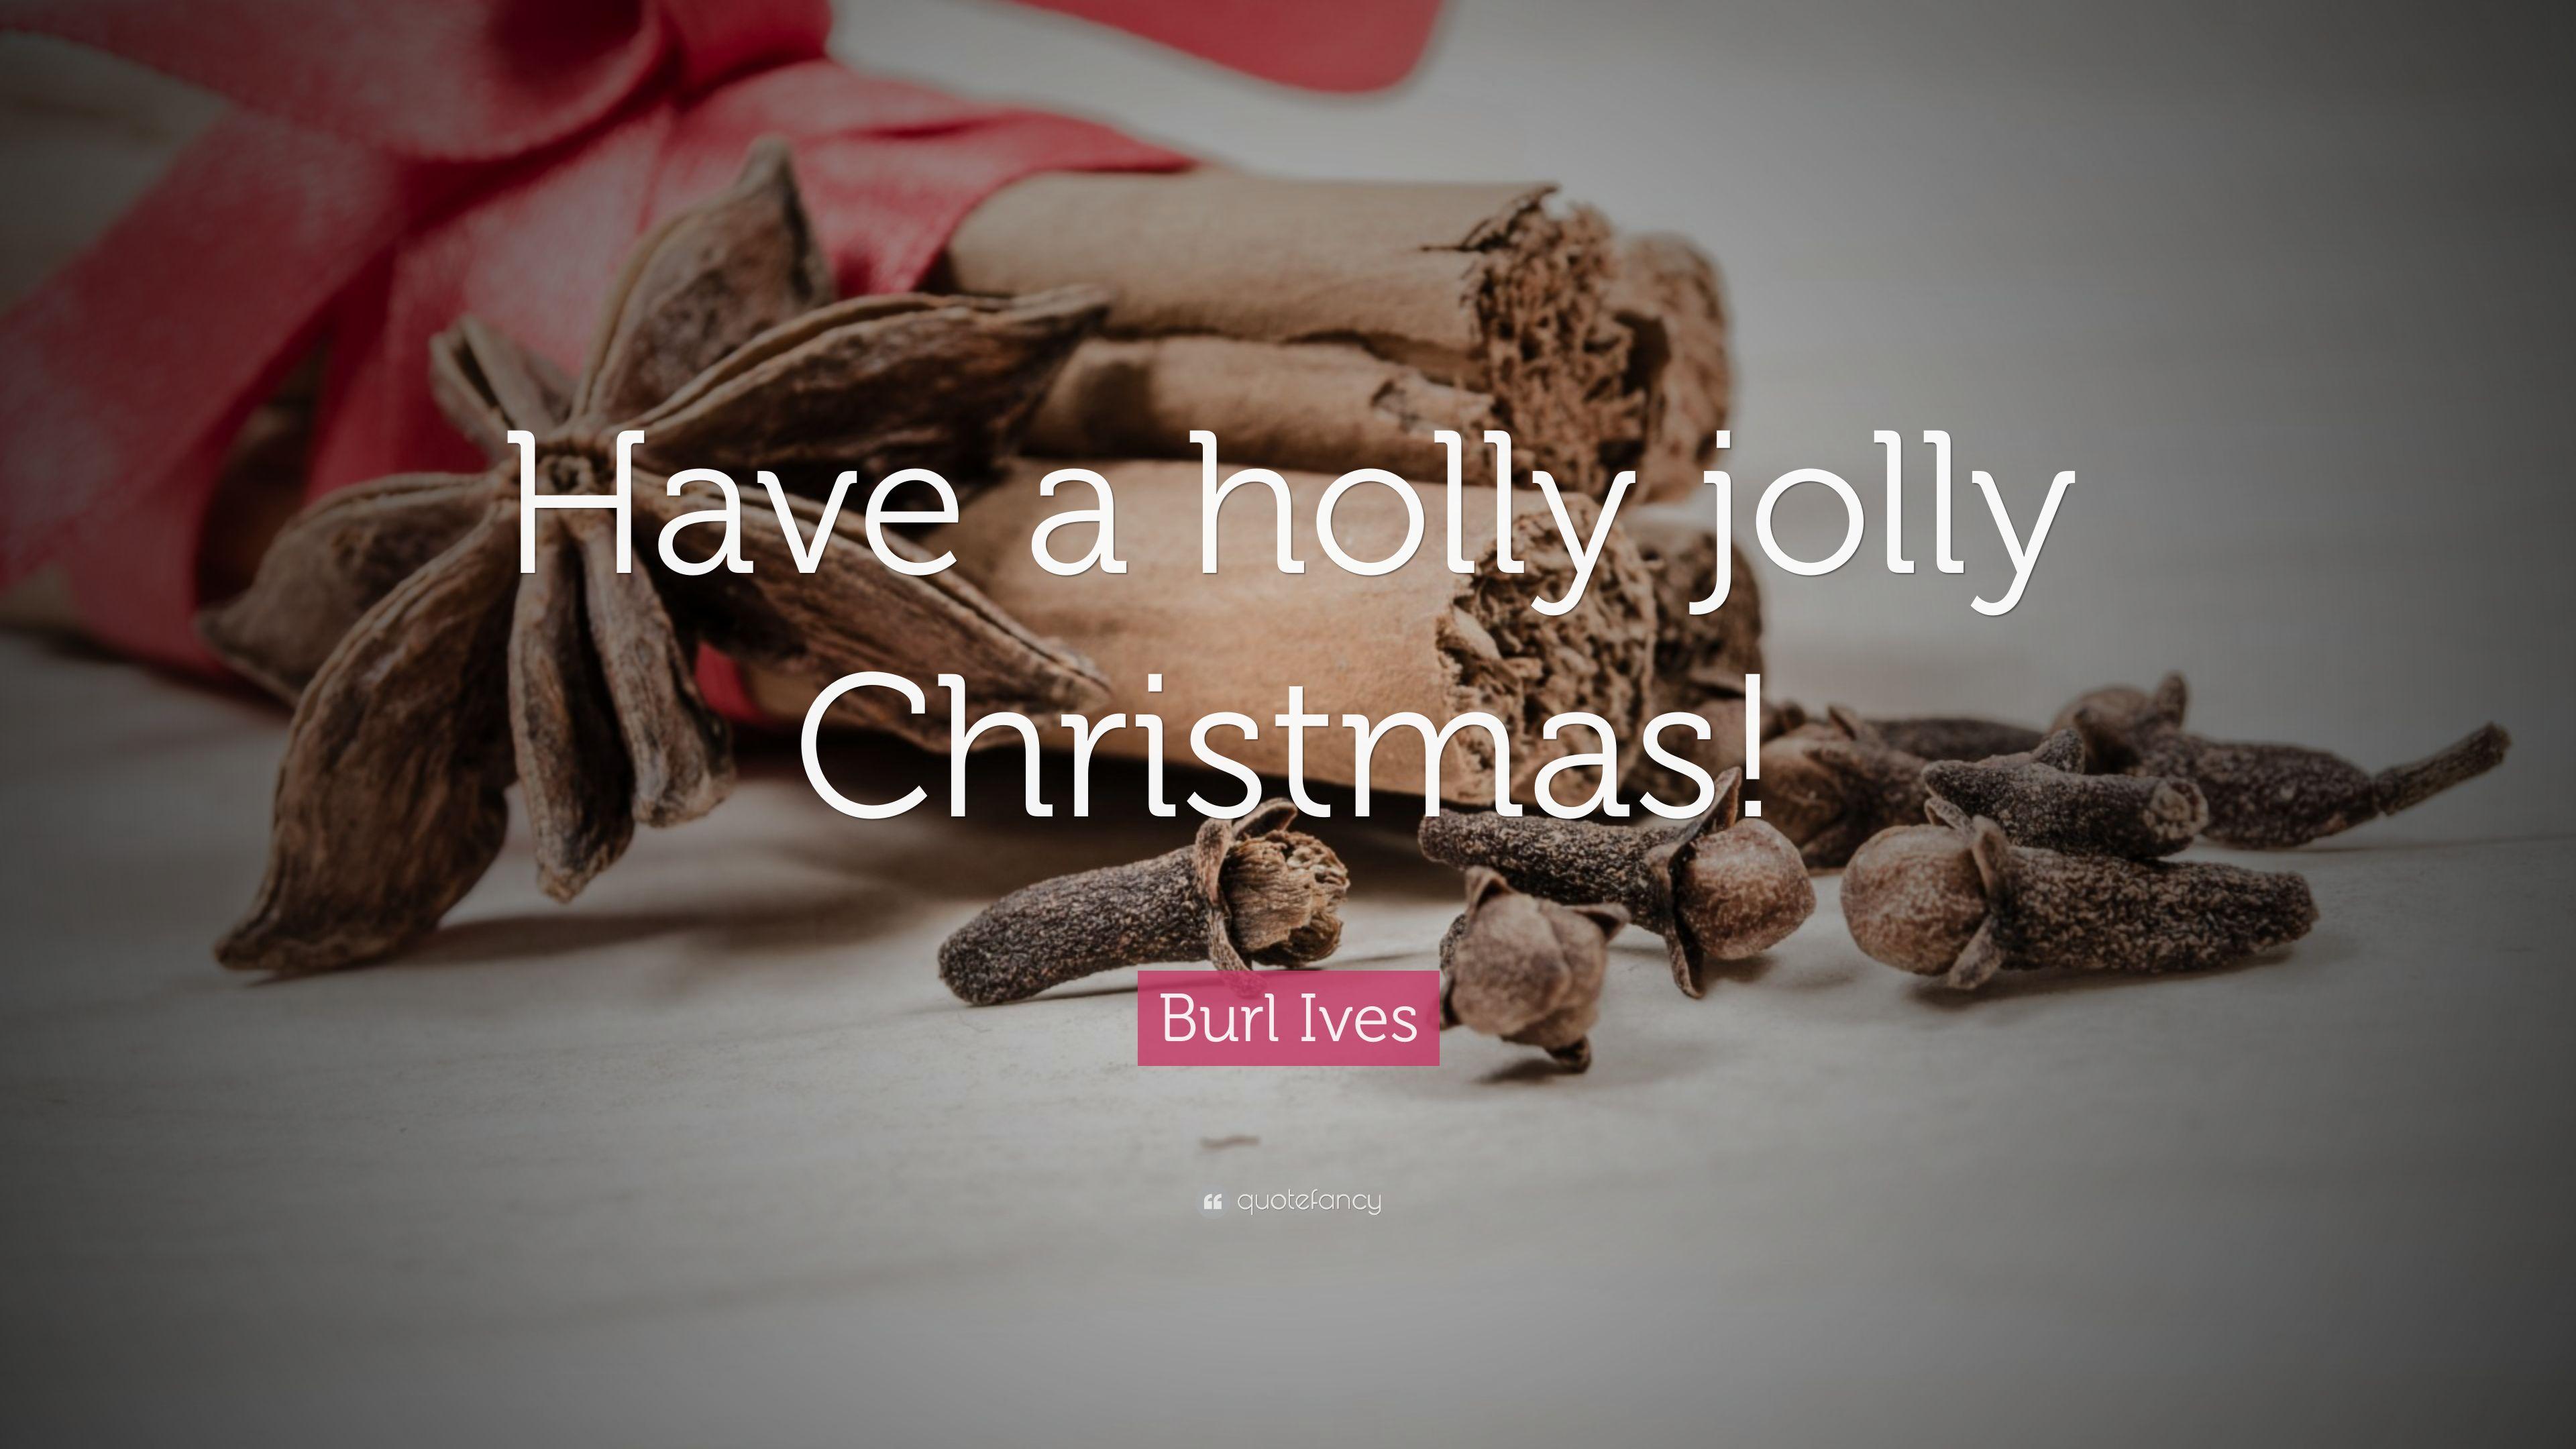 Burl Ives Quote: “Have a holly jolly Christmas!” 7 wallpaper